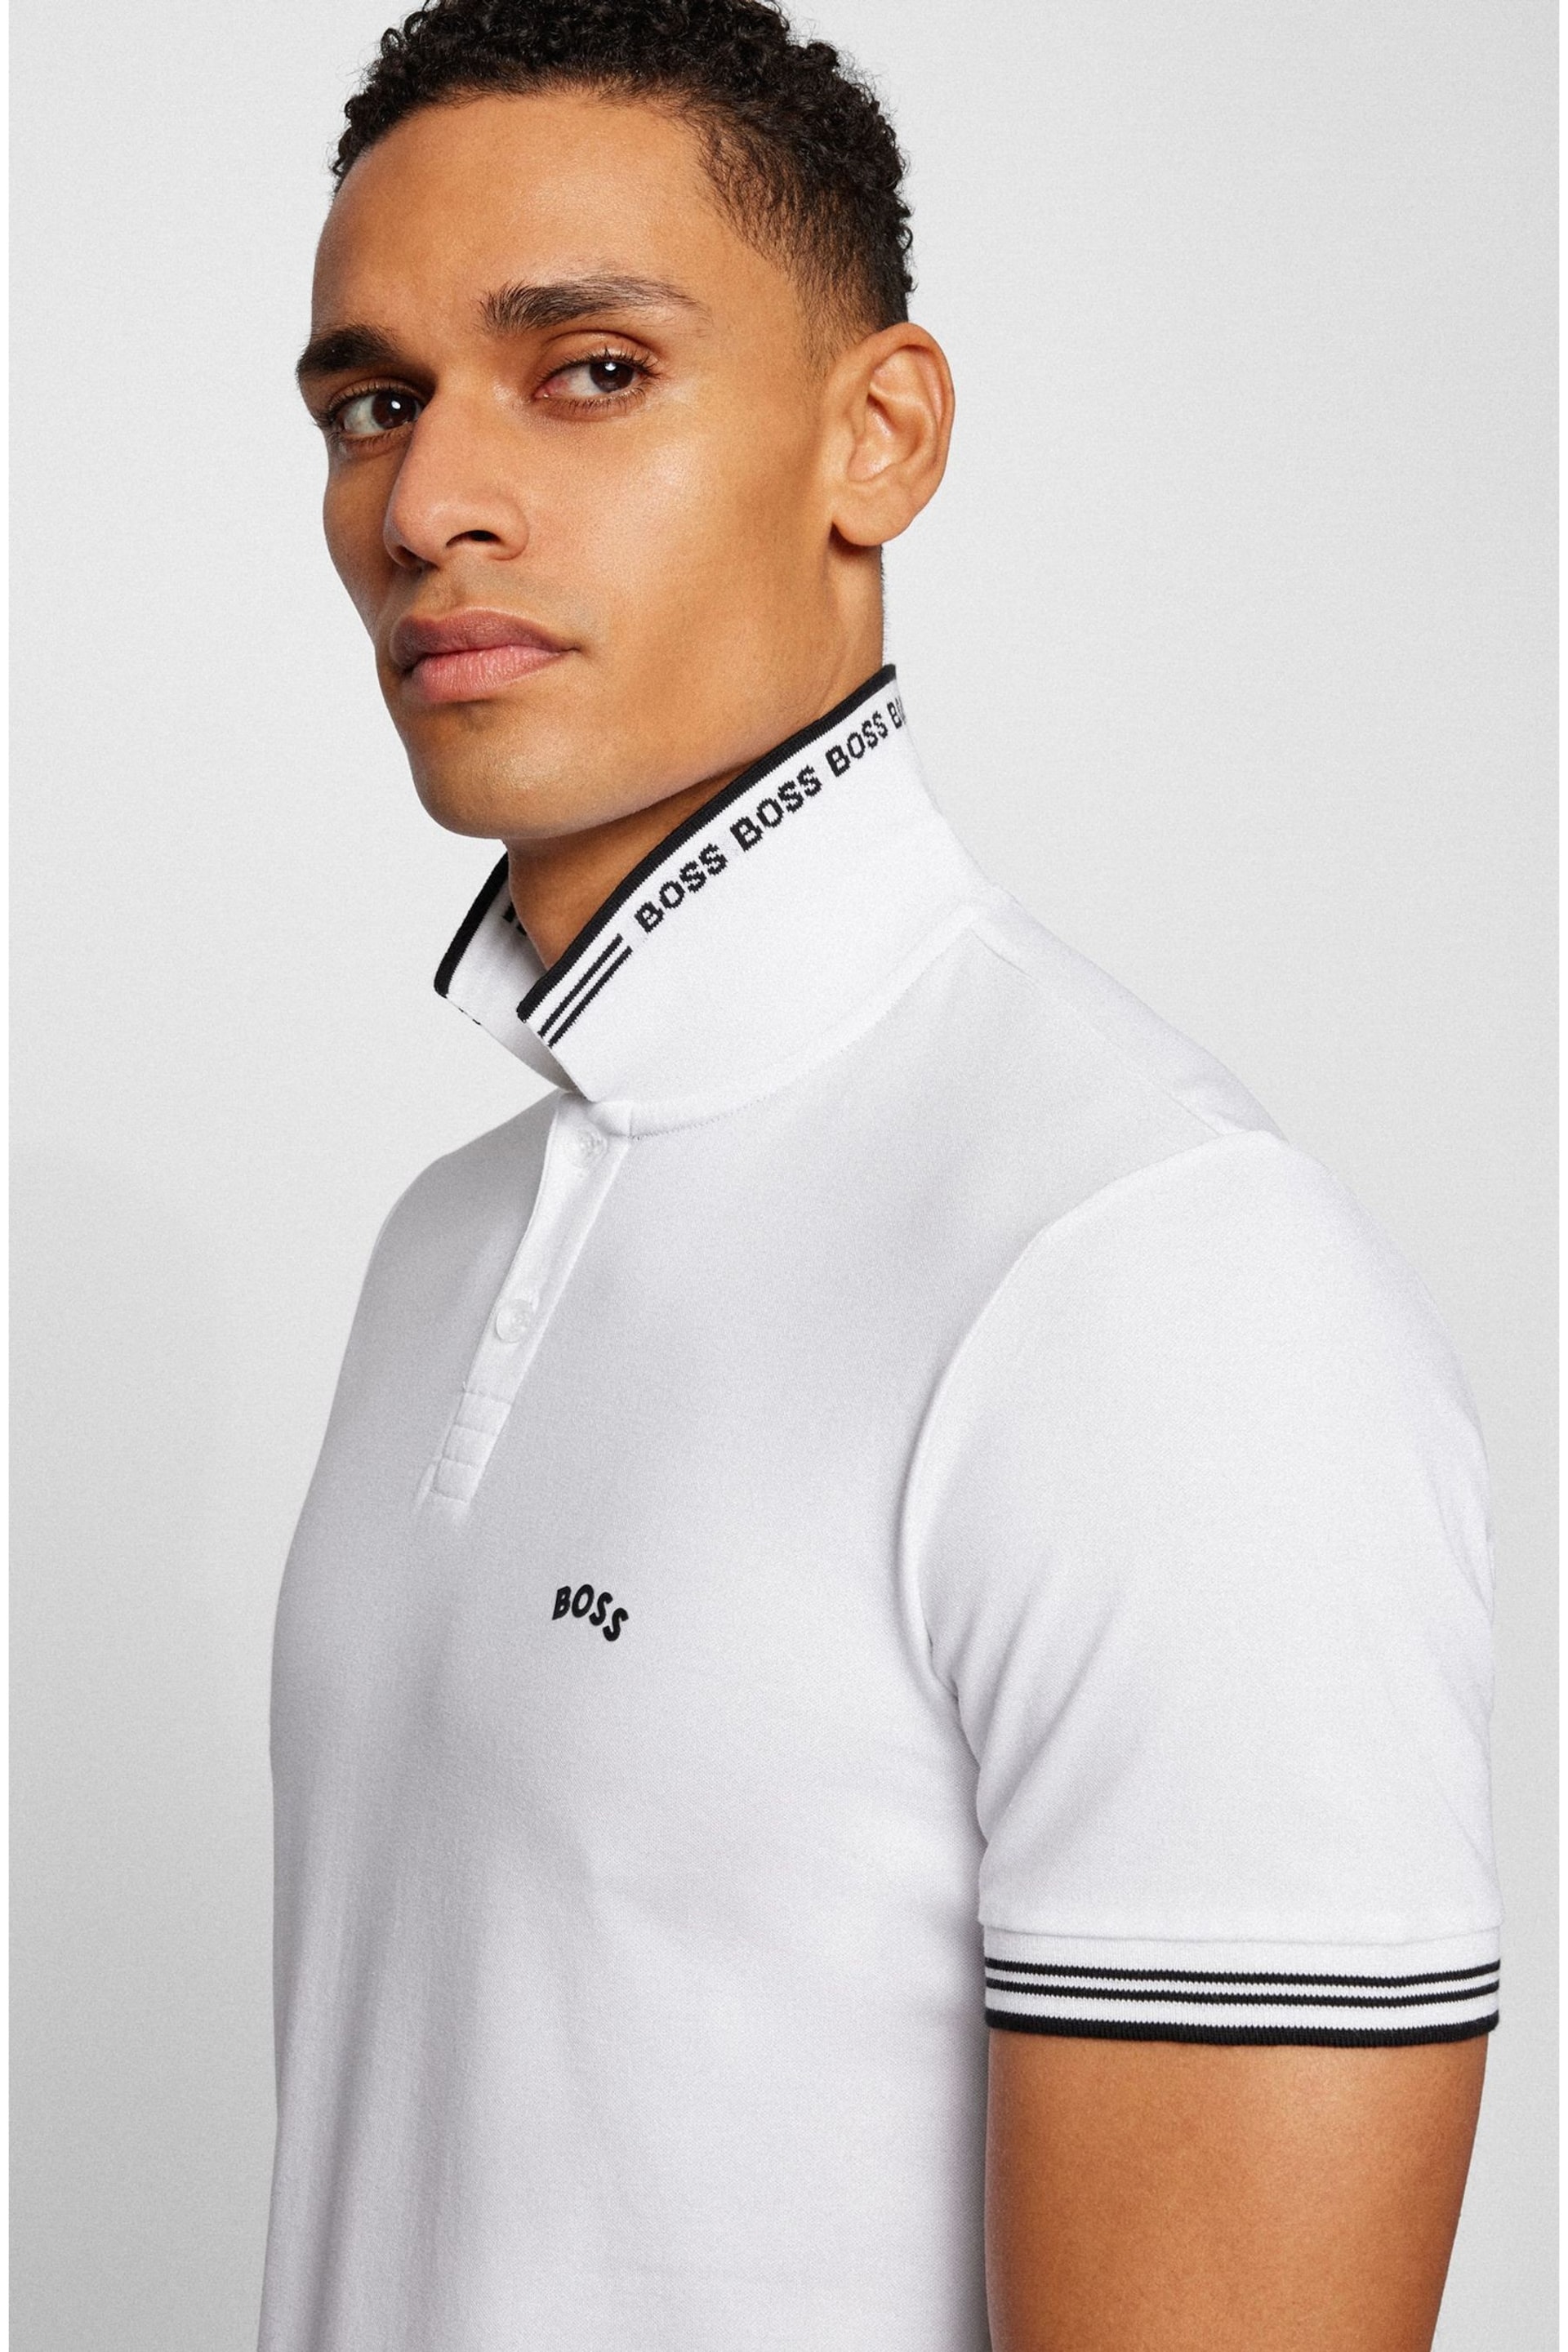 BOSS White Tipped Slim Fit Stretch Cotton Polo Shirt - Image 4 of 5